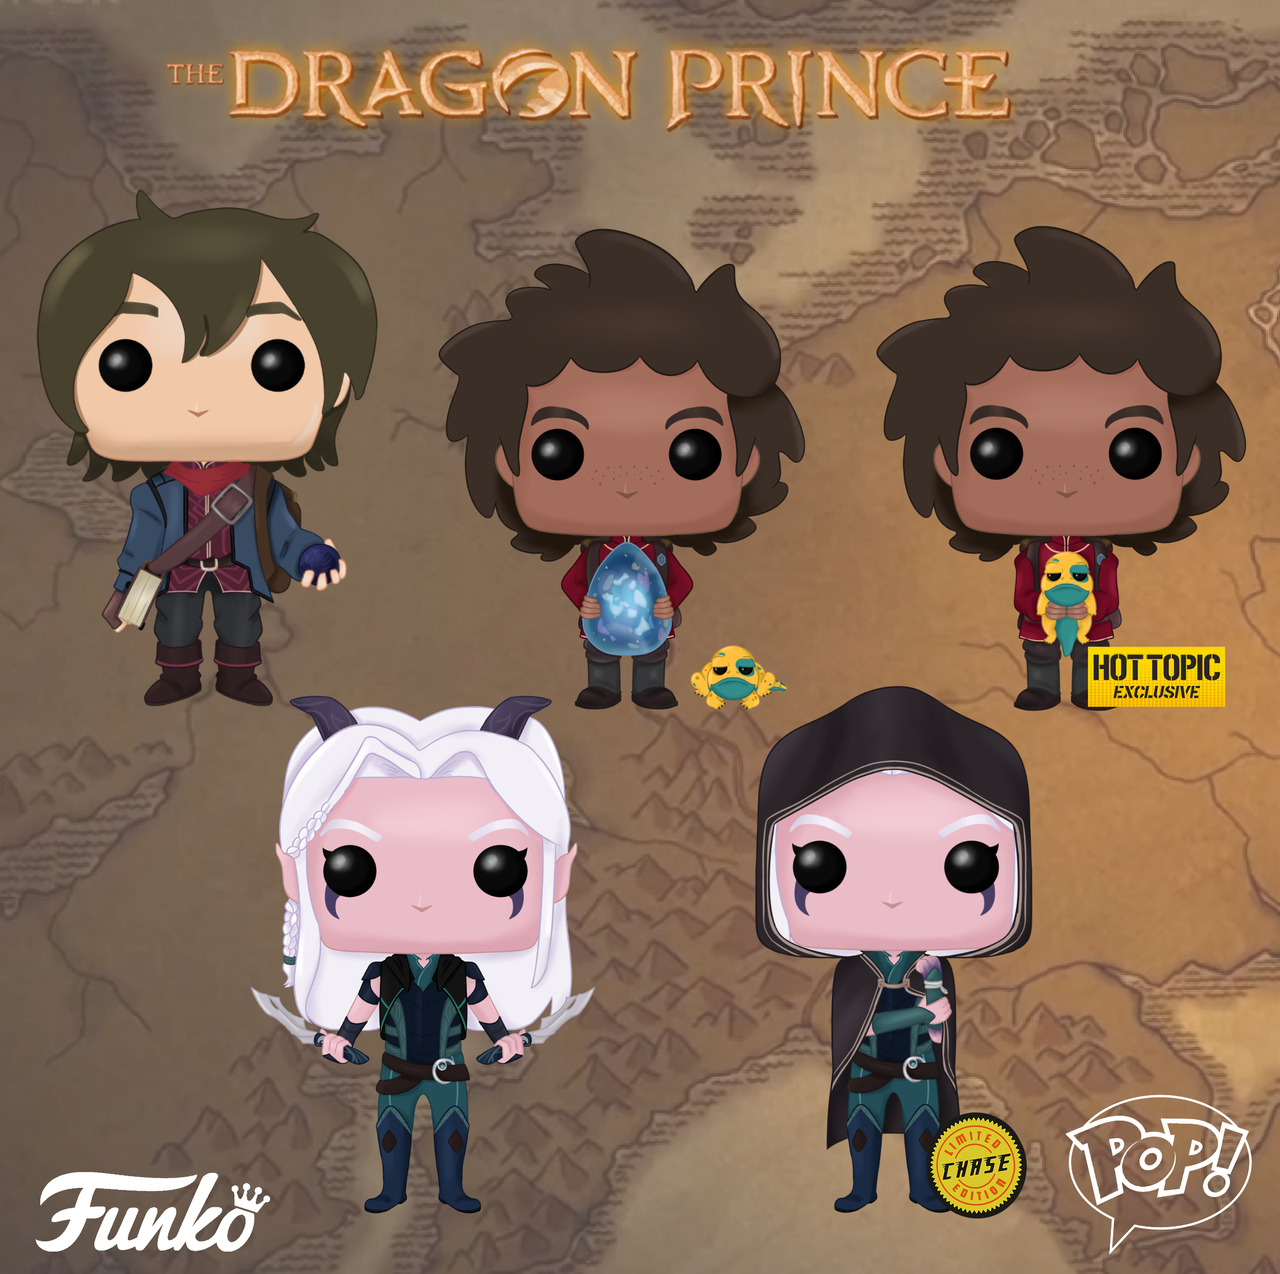 The Prince — New from “The Dragon Prince”! ...